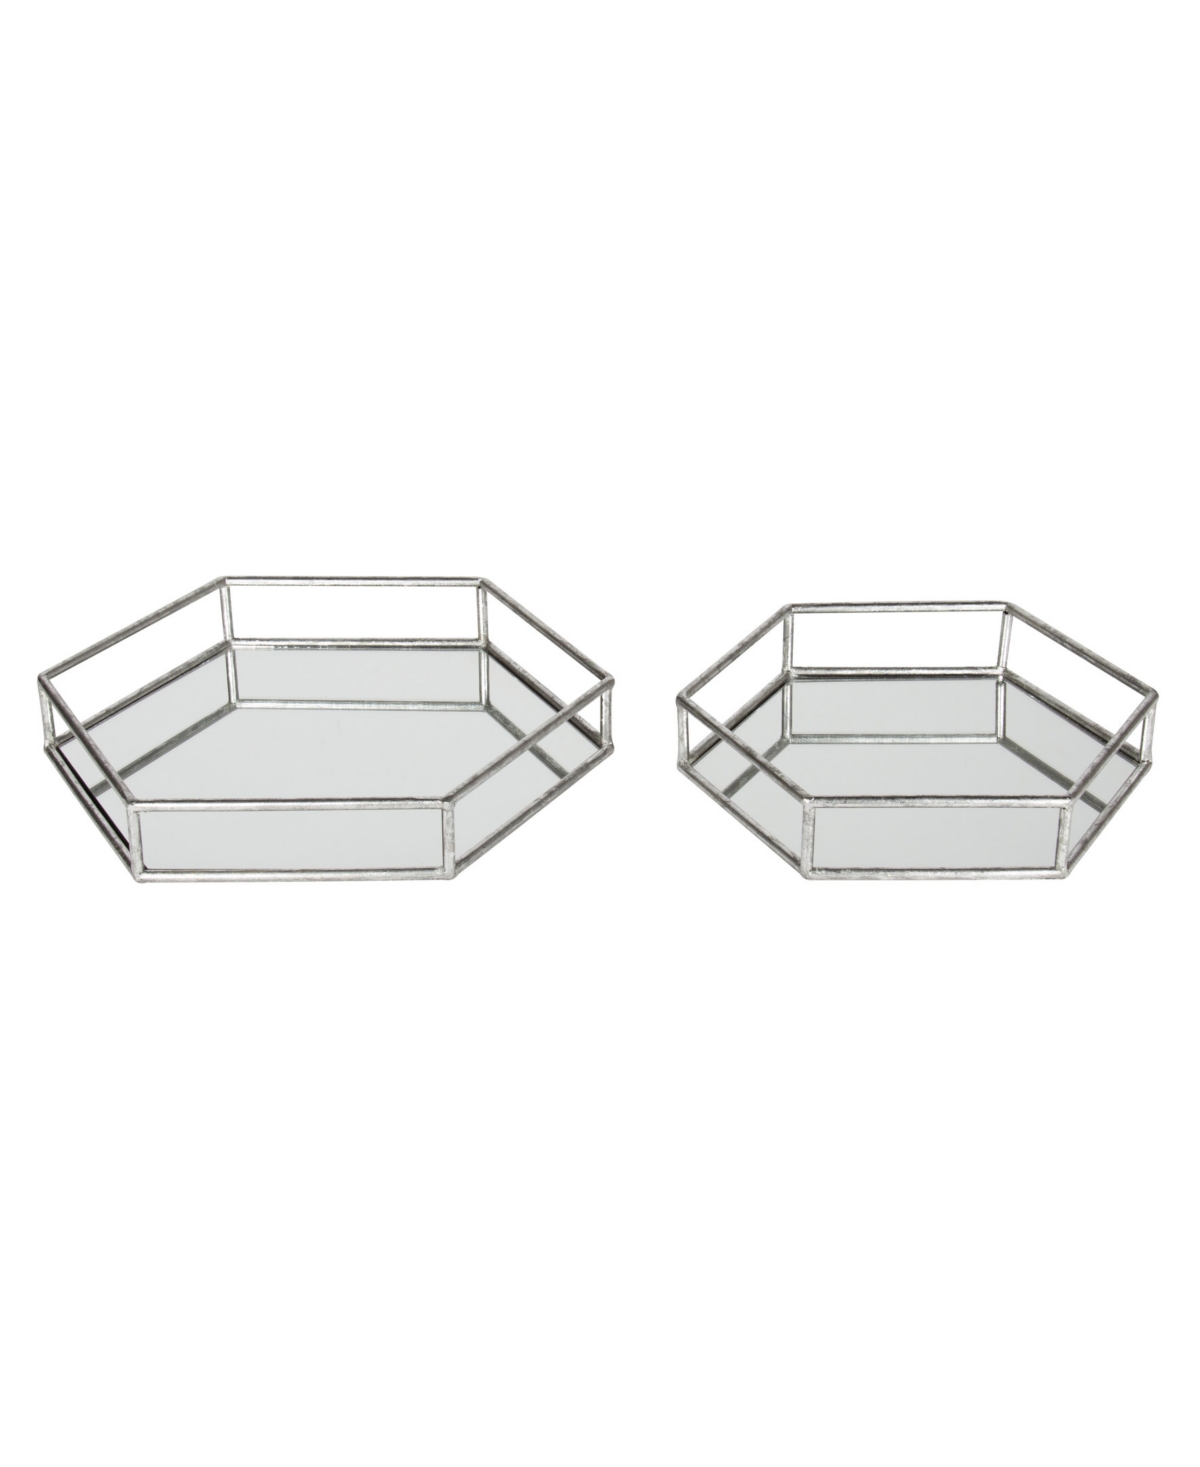 Kate And Laurel Felicia Nesting Metal Mirrored Decorative Trays, 2 Piece In Silver